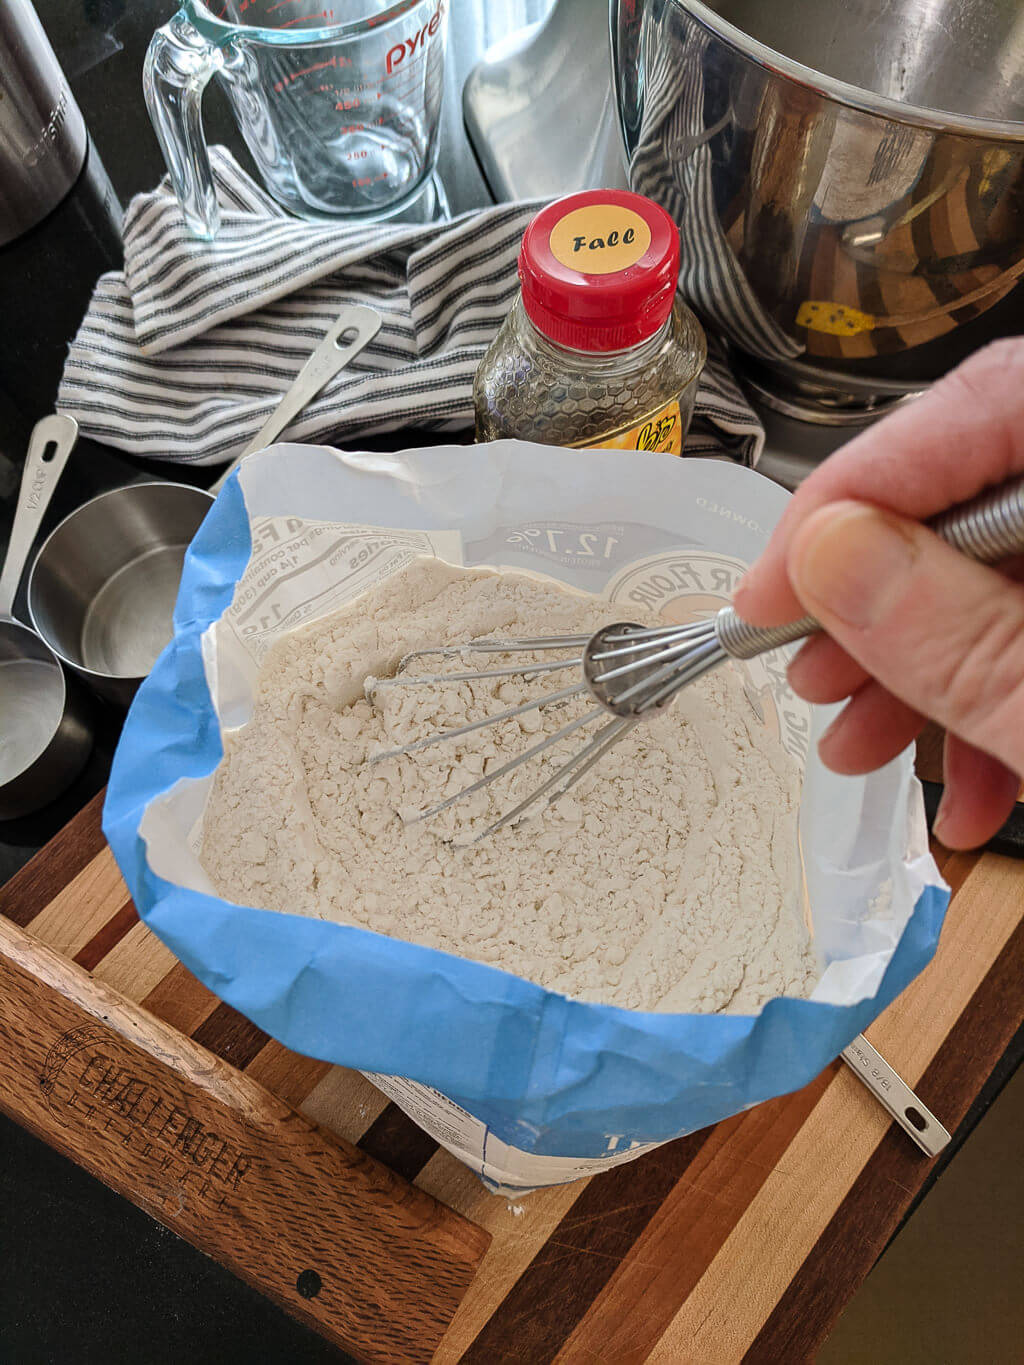 Aerating flour with a whisk before measuring